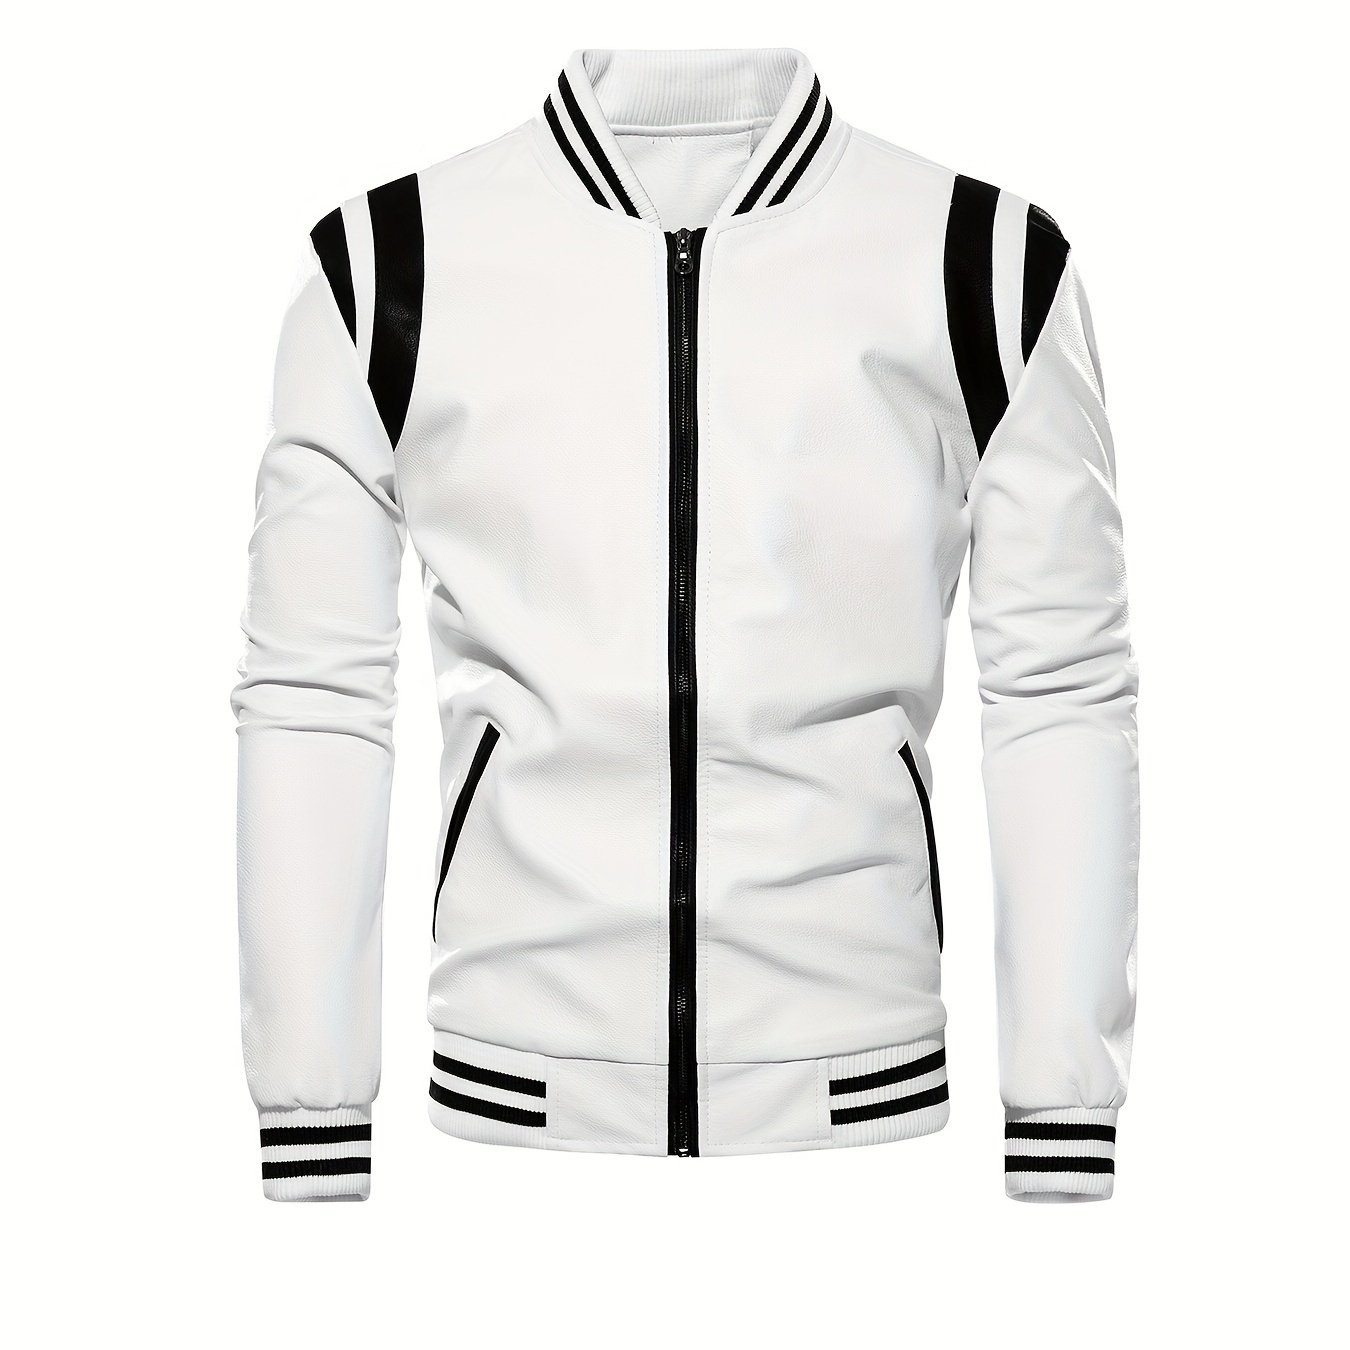 

Men's Stylish Comfy Vintage Style Color Matching Pu Leather Jacket With Pockets, Casual Baseball Collar Zip Up Long Sleeve Varsity Jacket